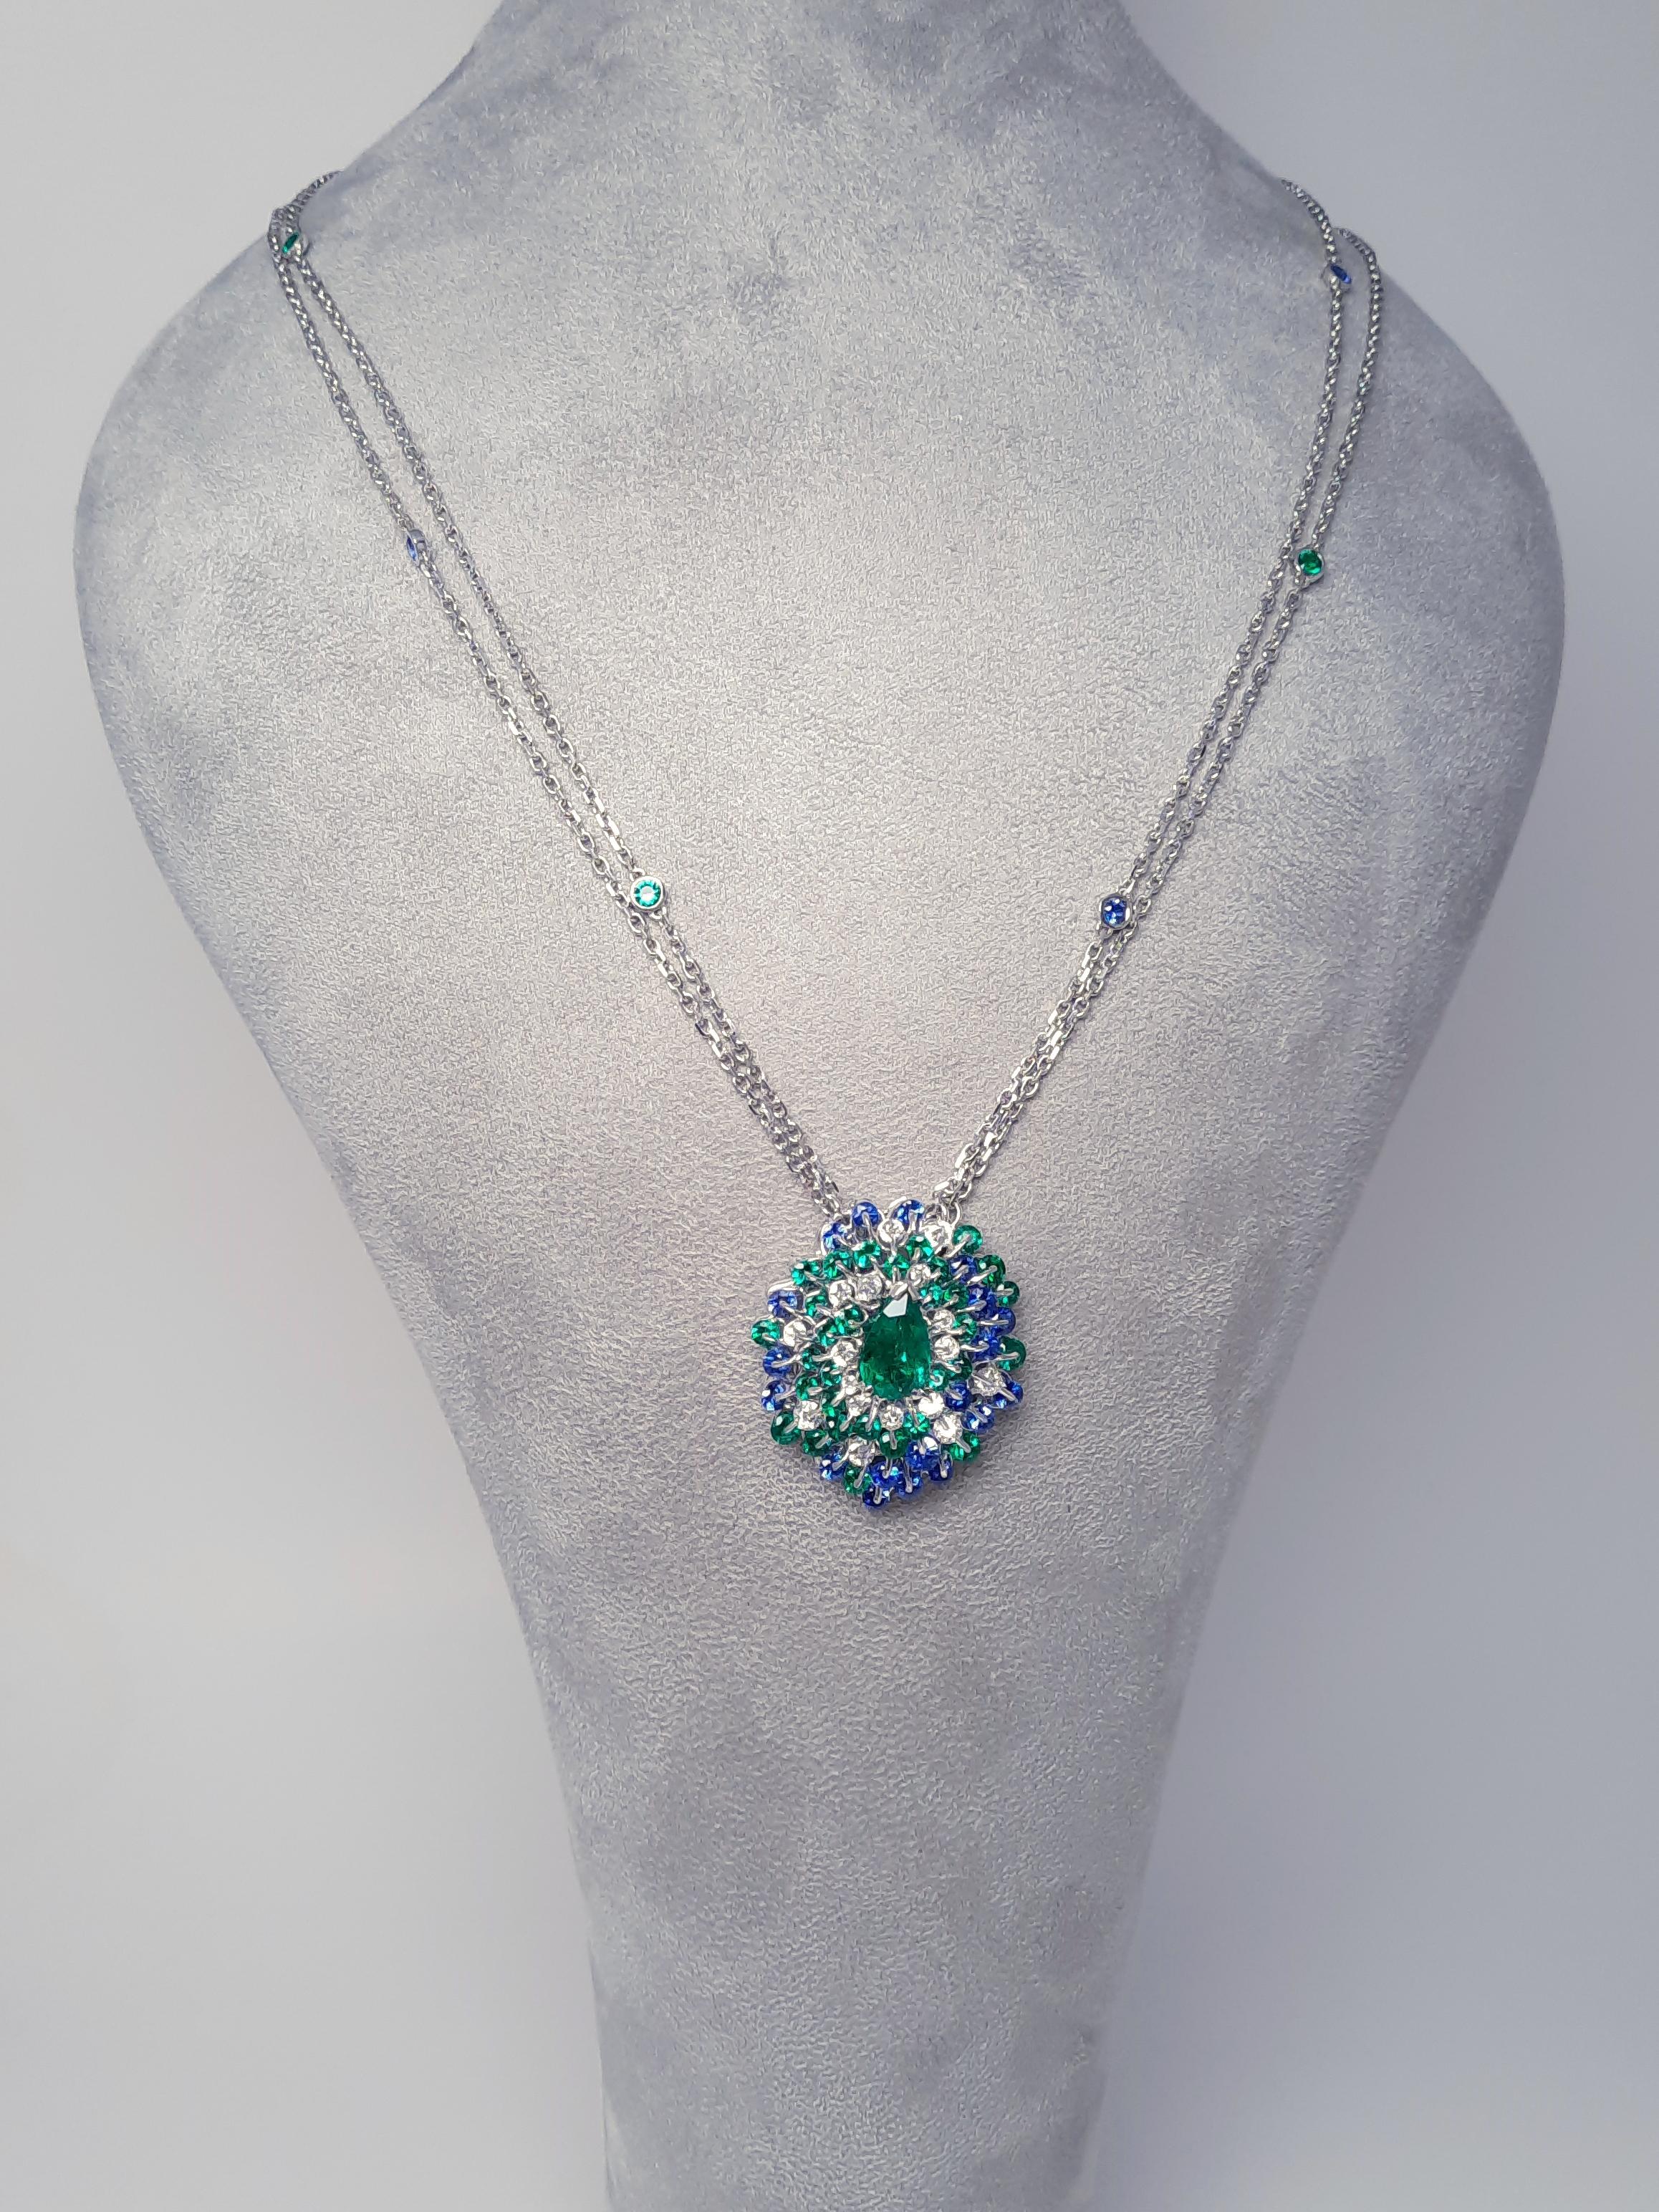 MOISEIKIN 1.45ct No Oil Columbian Emerald Diamond Sapphire Necklace In New Condition For Sale In Hong Kong, HK